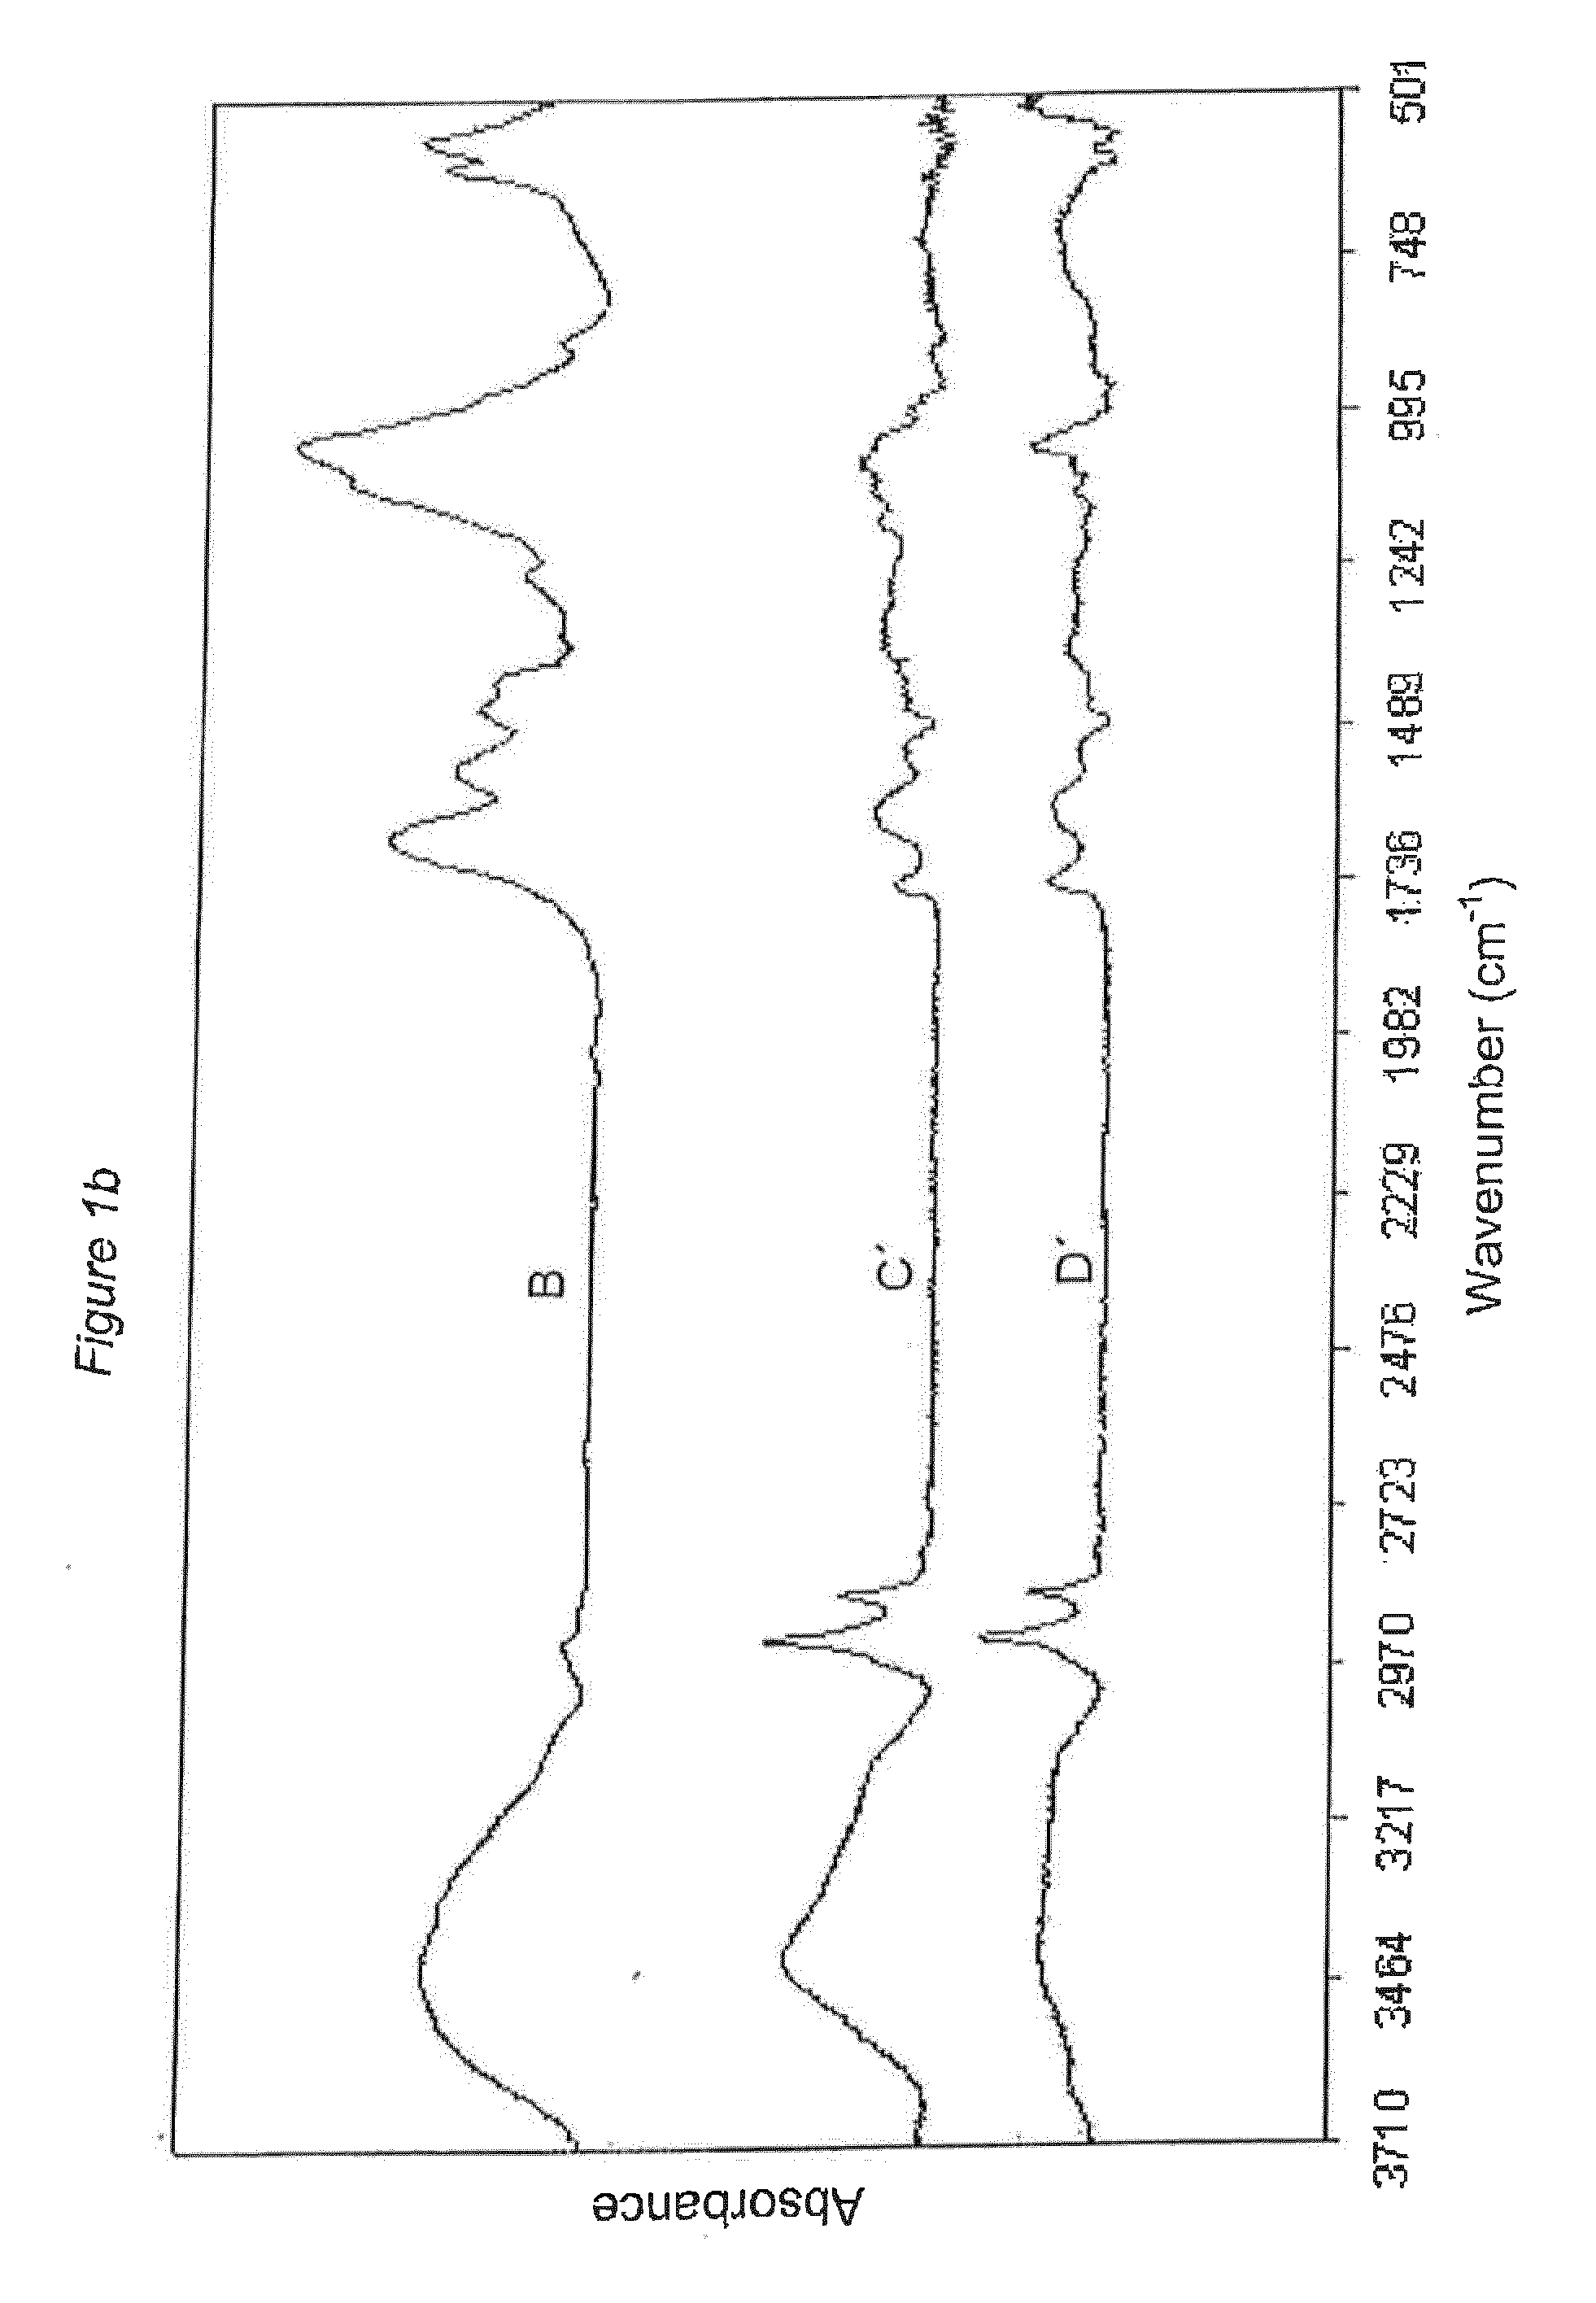 Detection of carious dentin tissue and removal thereof by means of a dental instrument